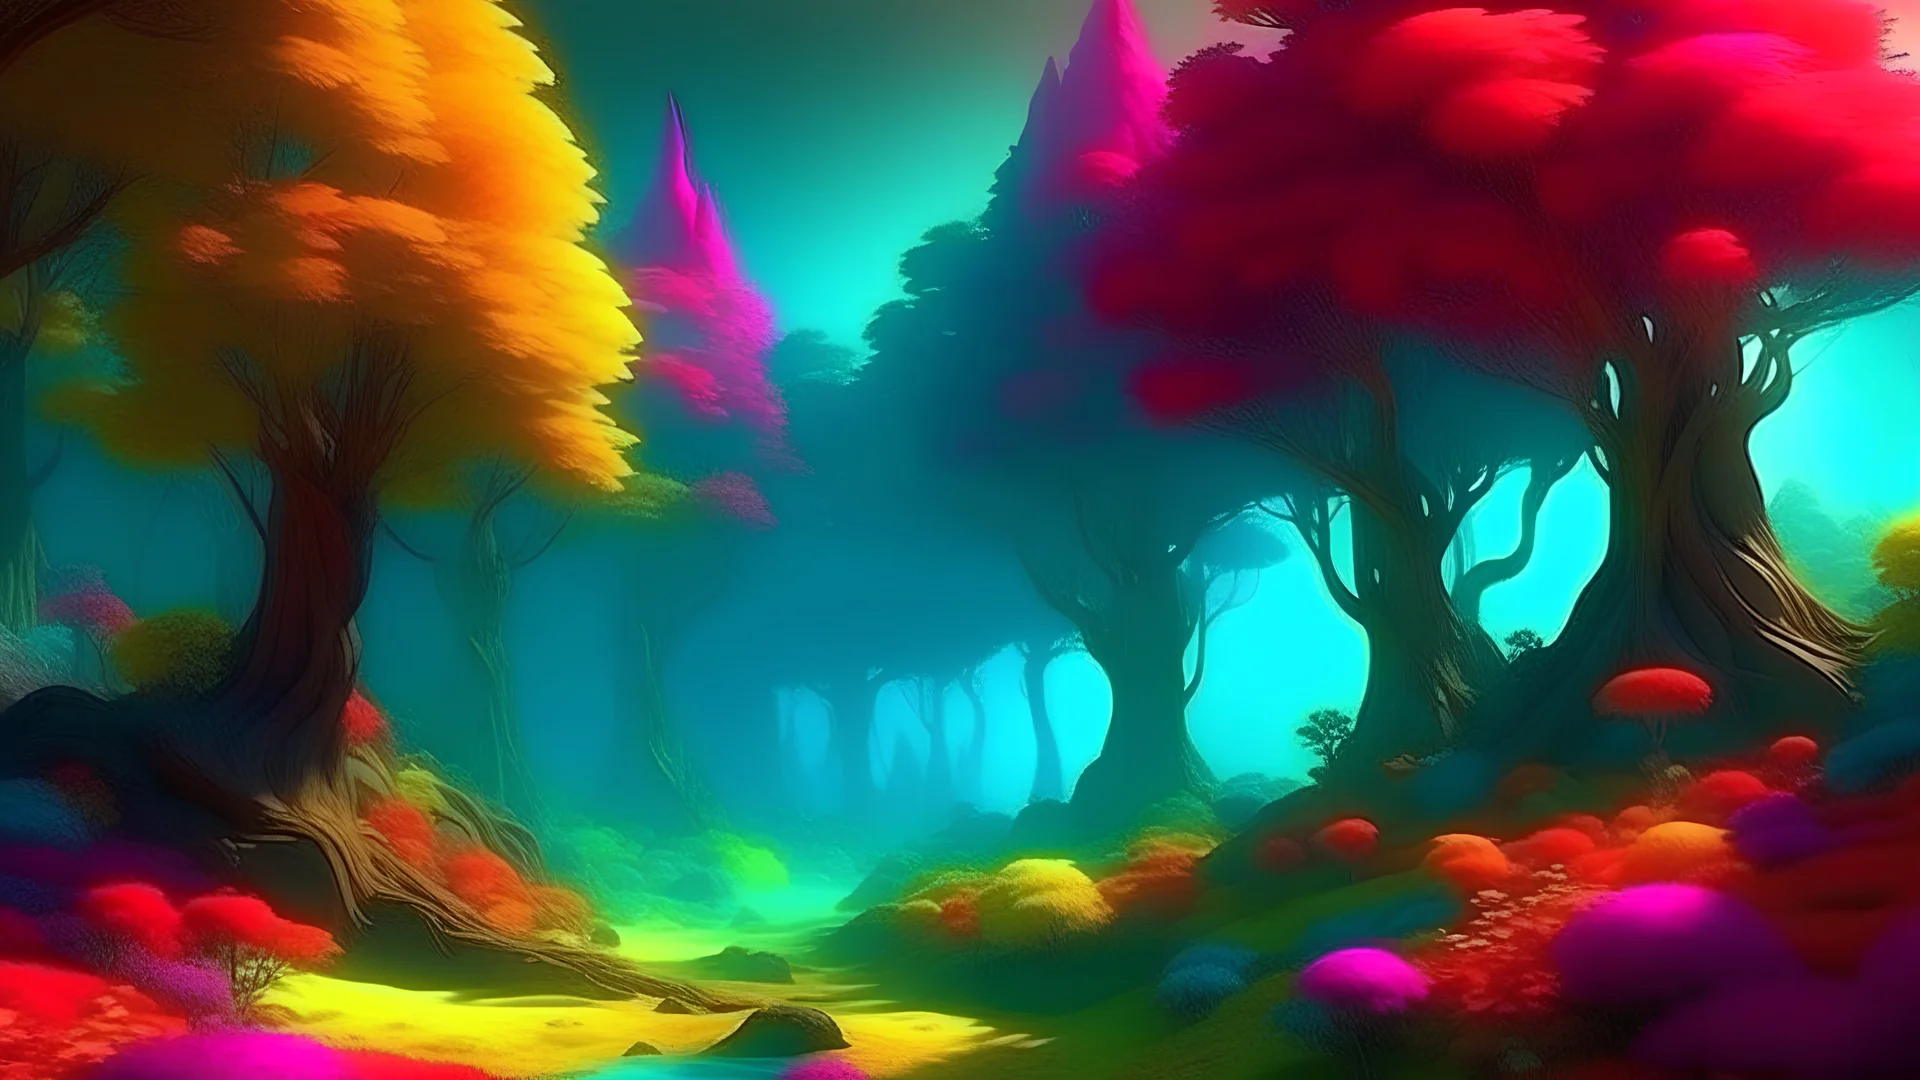 FANTASY FOREST LANDSCAPE ANIMATED WITH MORE COLORS